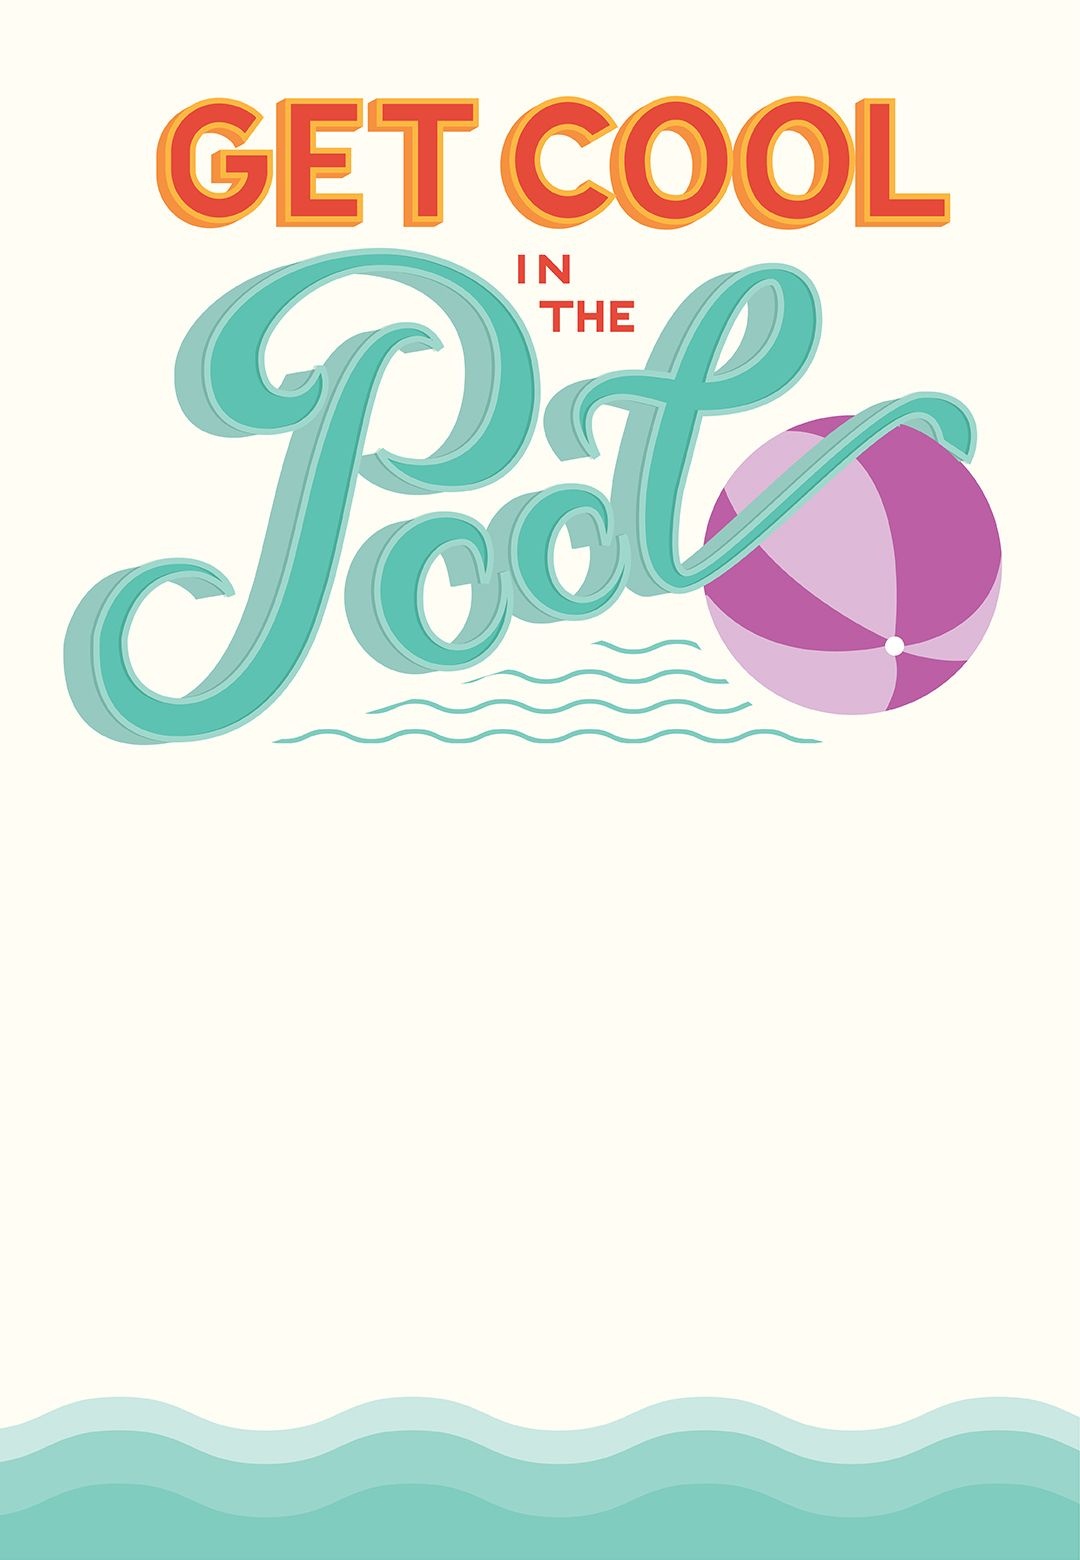 Pool Party - Free Printable Party Invitation Template | Greetings - Free Printable Pool Party Birthday Invitations